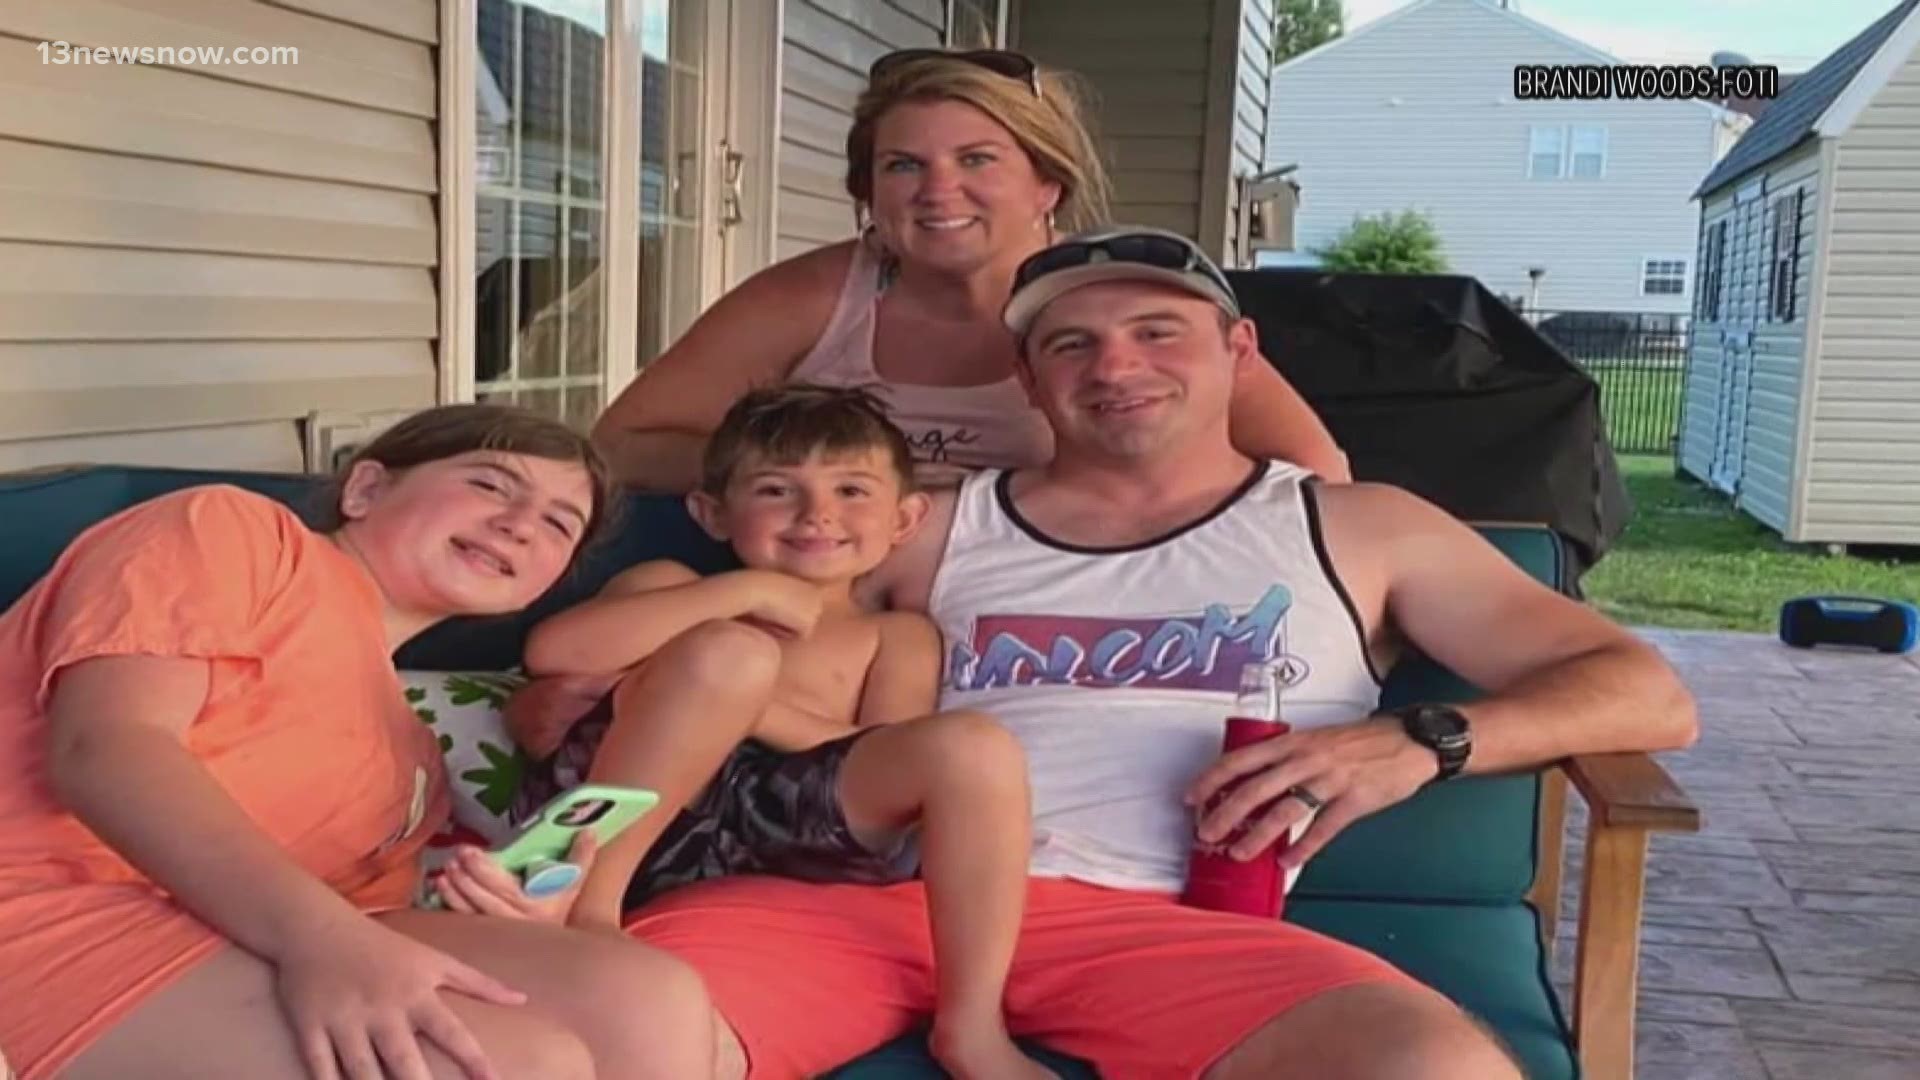 The late Chief Petty Officer Adam Foti leaves behind a wife and two kids in Moyock, North Carolina. Now the community is fundraising to help the family.